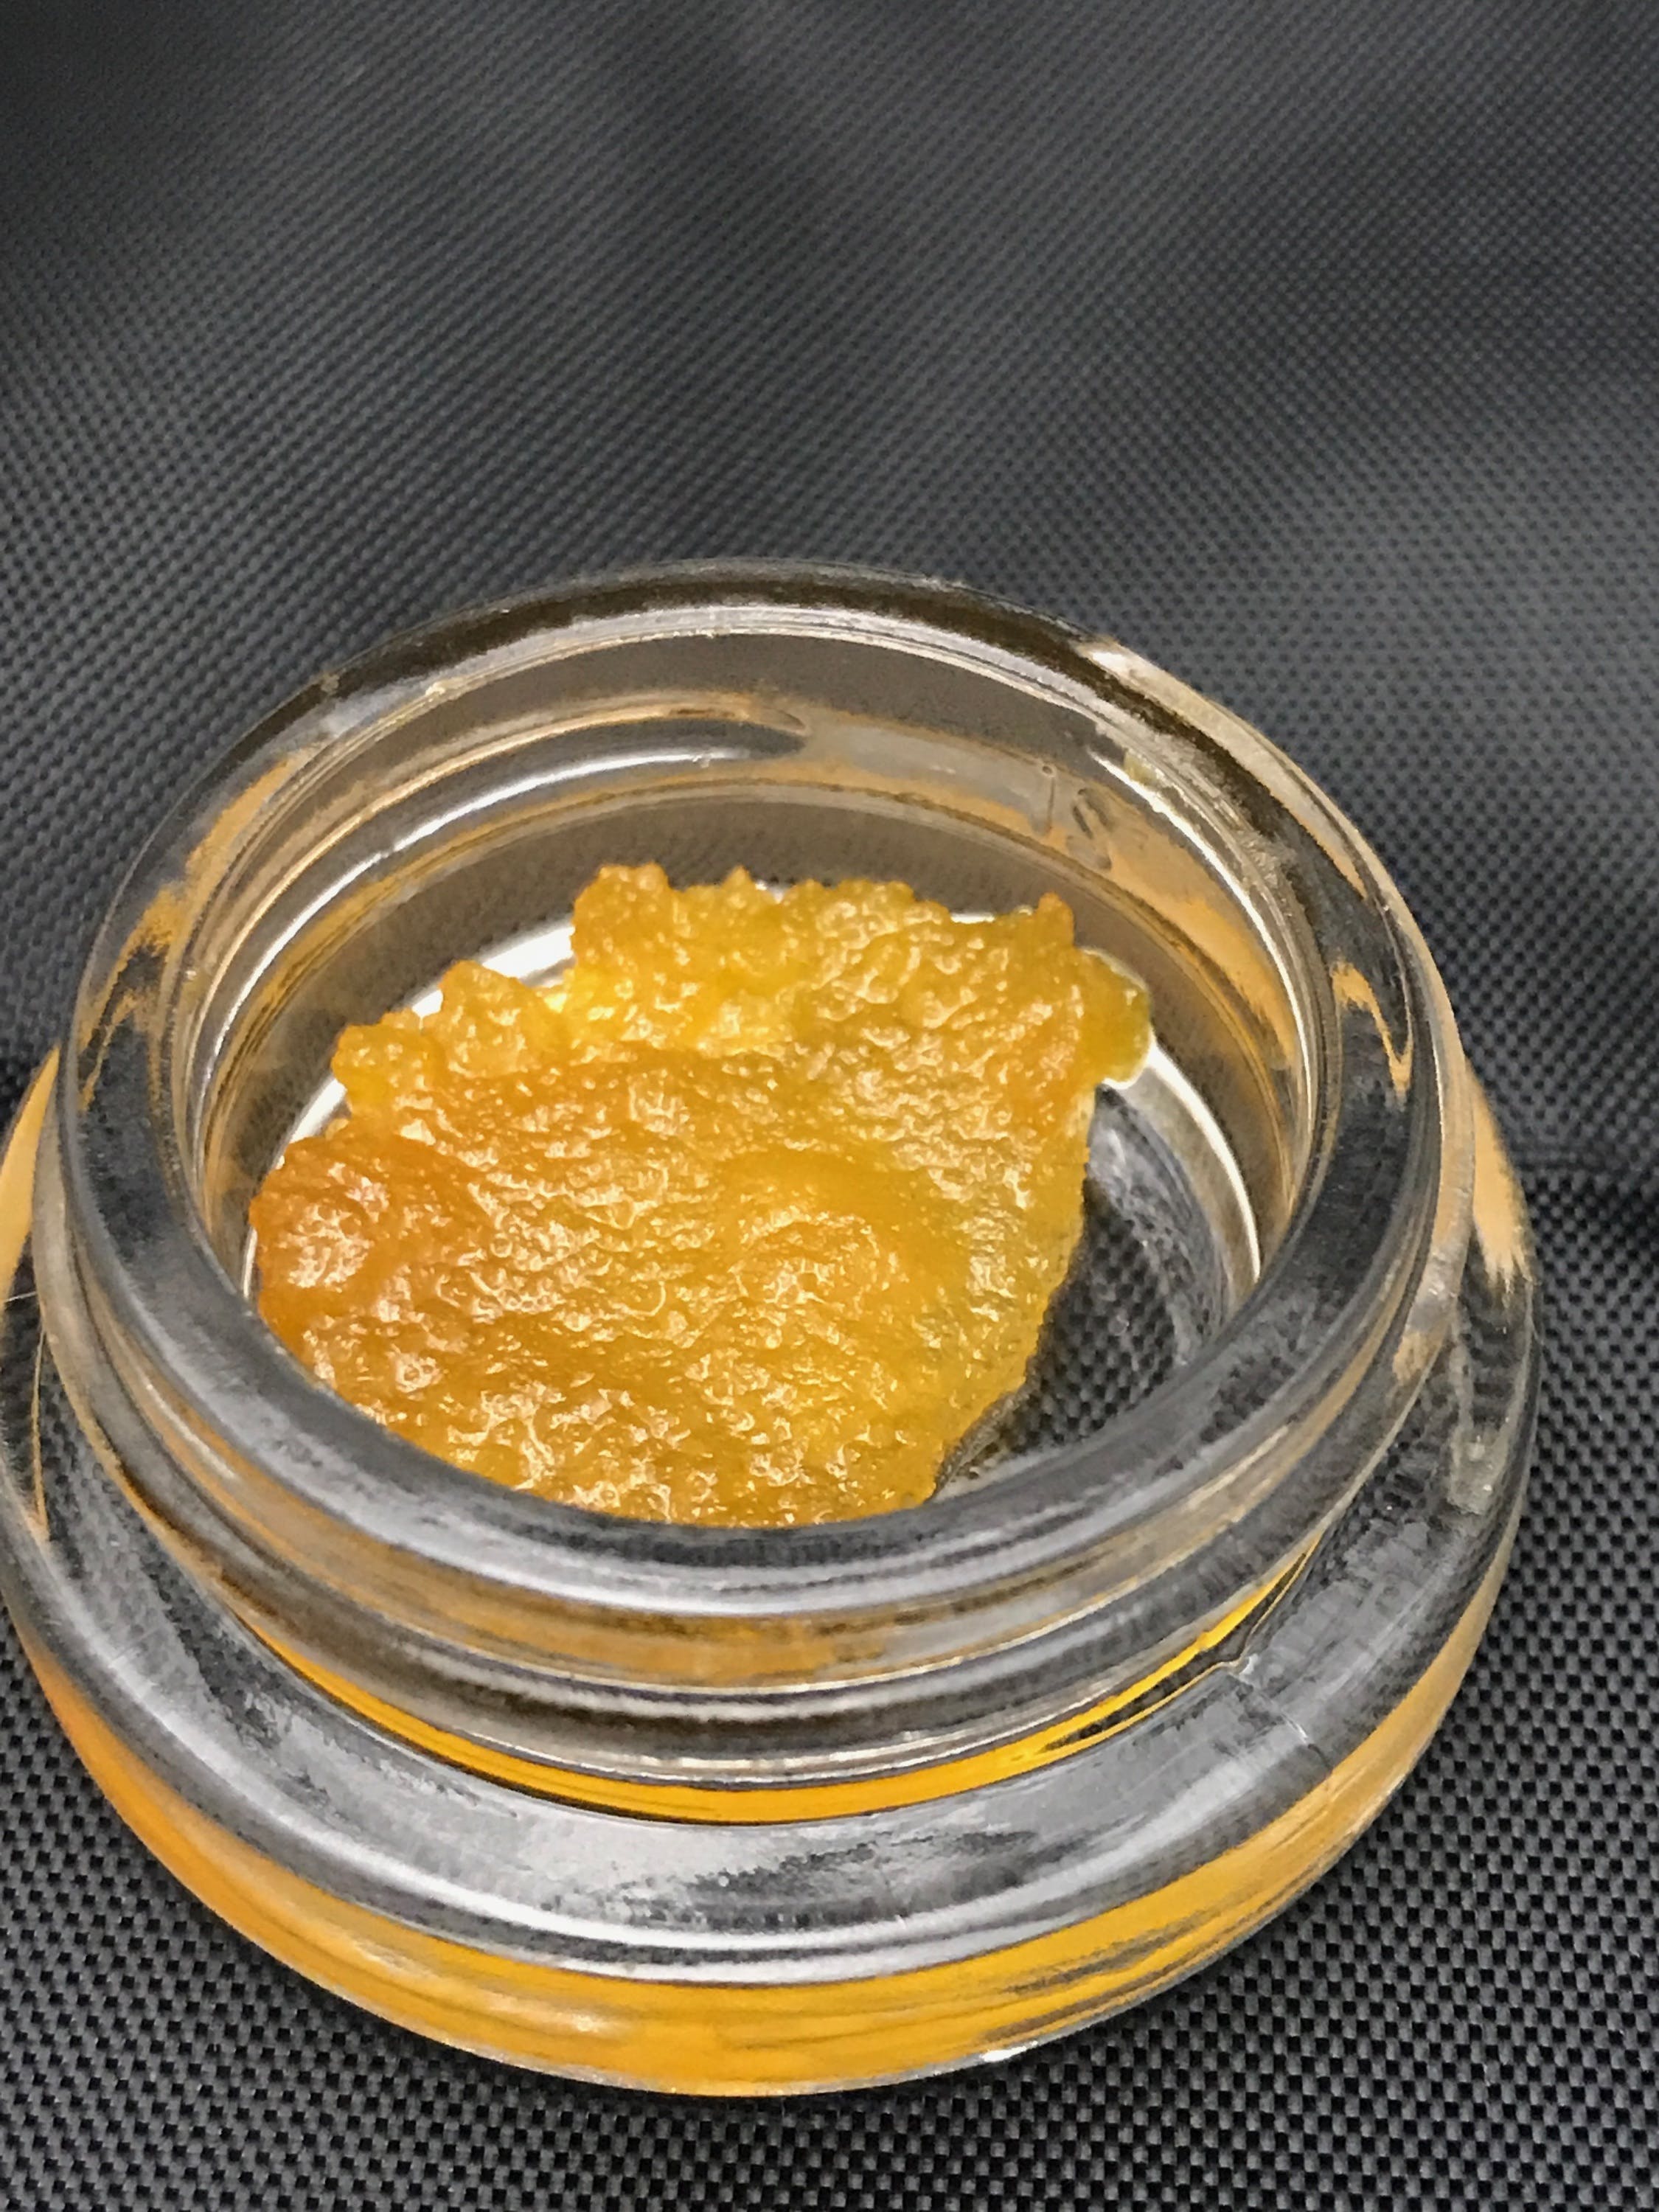 concentrate-infinite-sugar-wax-ghost-of-lee-roy